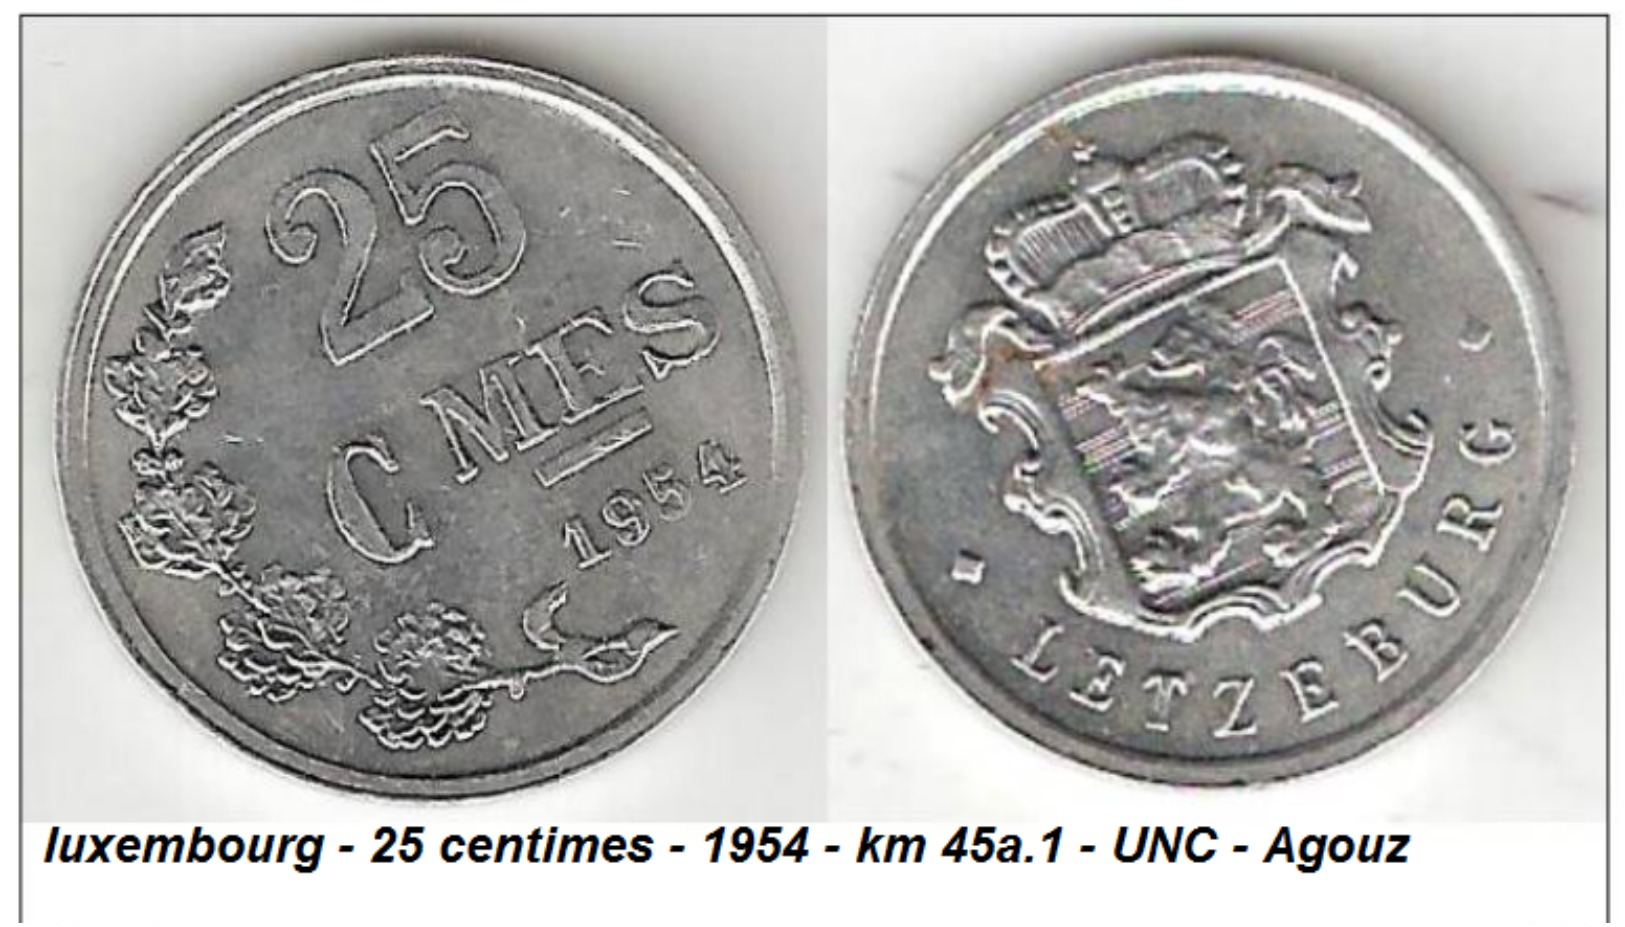 Luxembourg - 25 Centimes - 1954 - Km 45a.1 - UNC - Agouz - Luxembourg